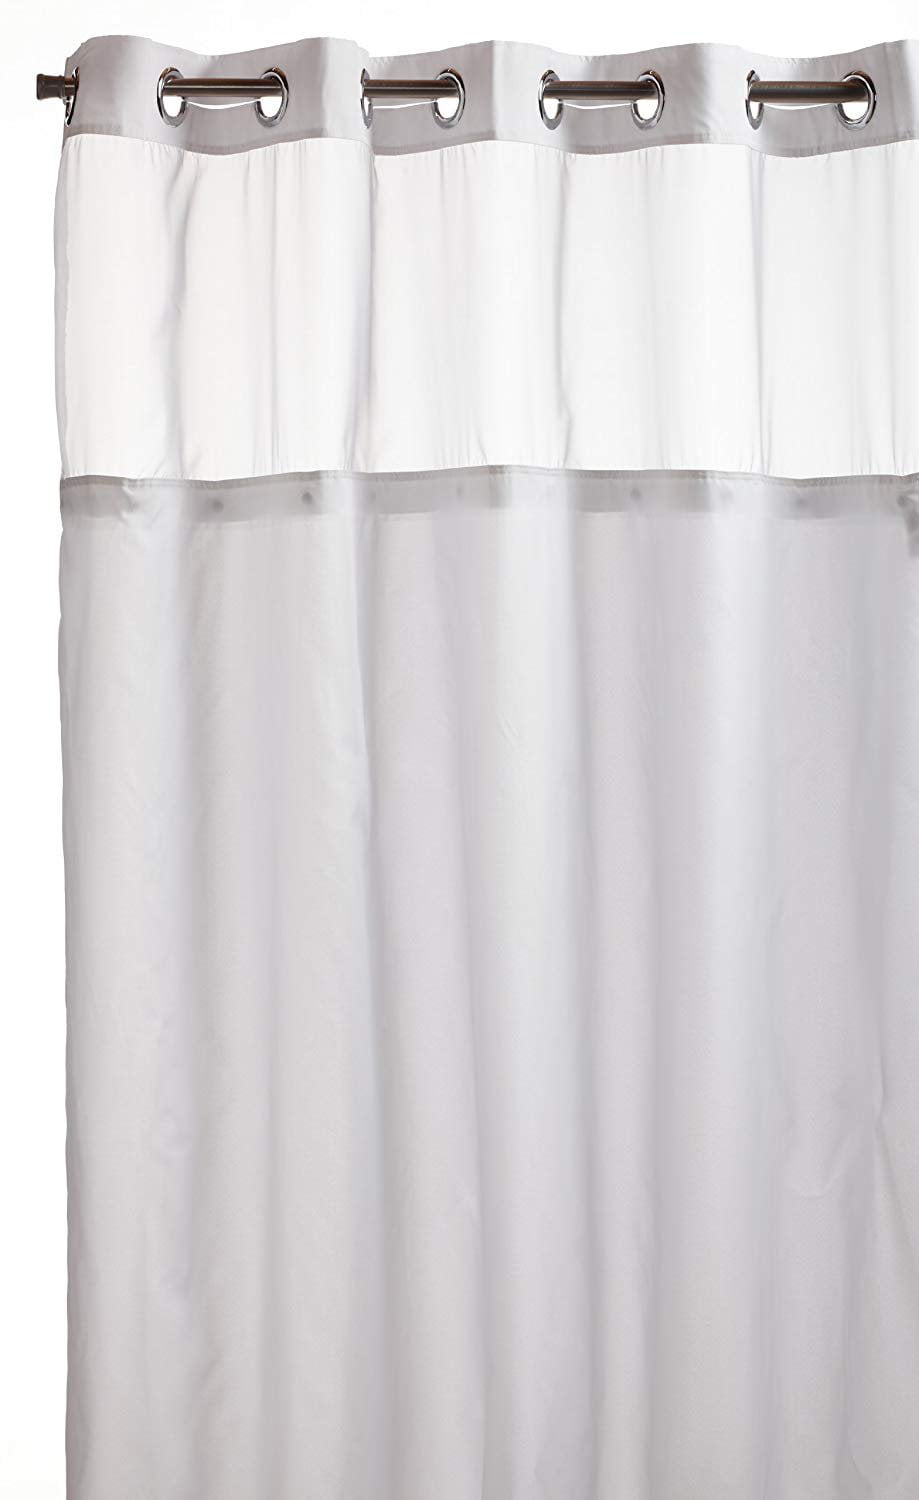 Hookless RBH40MY231 Mystery Snap-In Peva Liner Fabric Shower Curtain White 